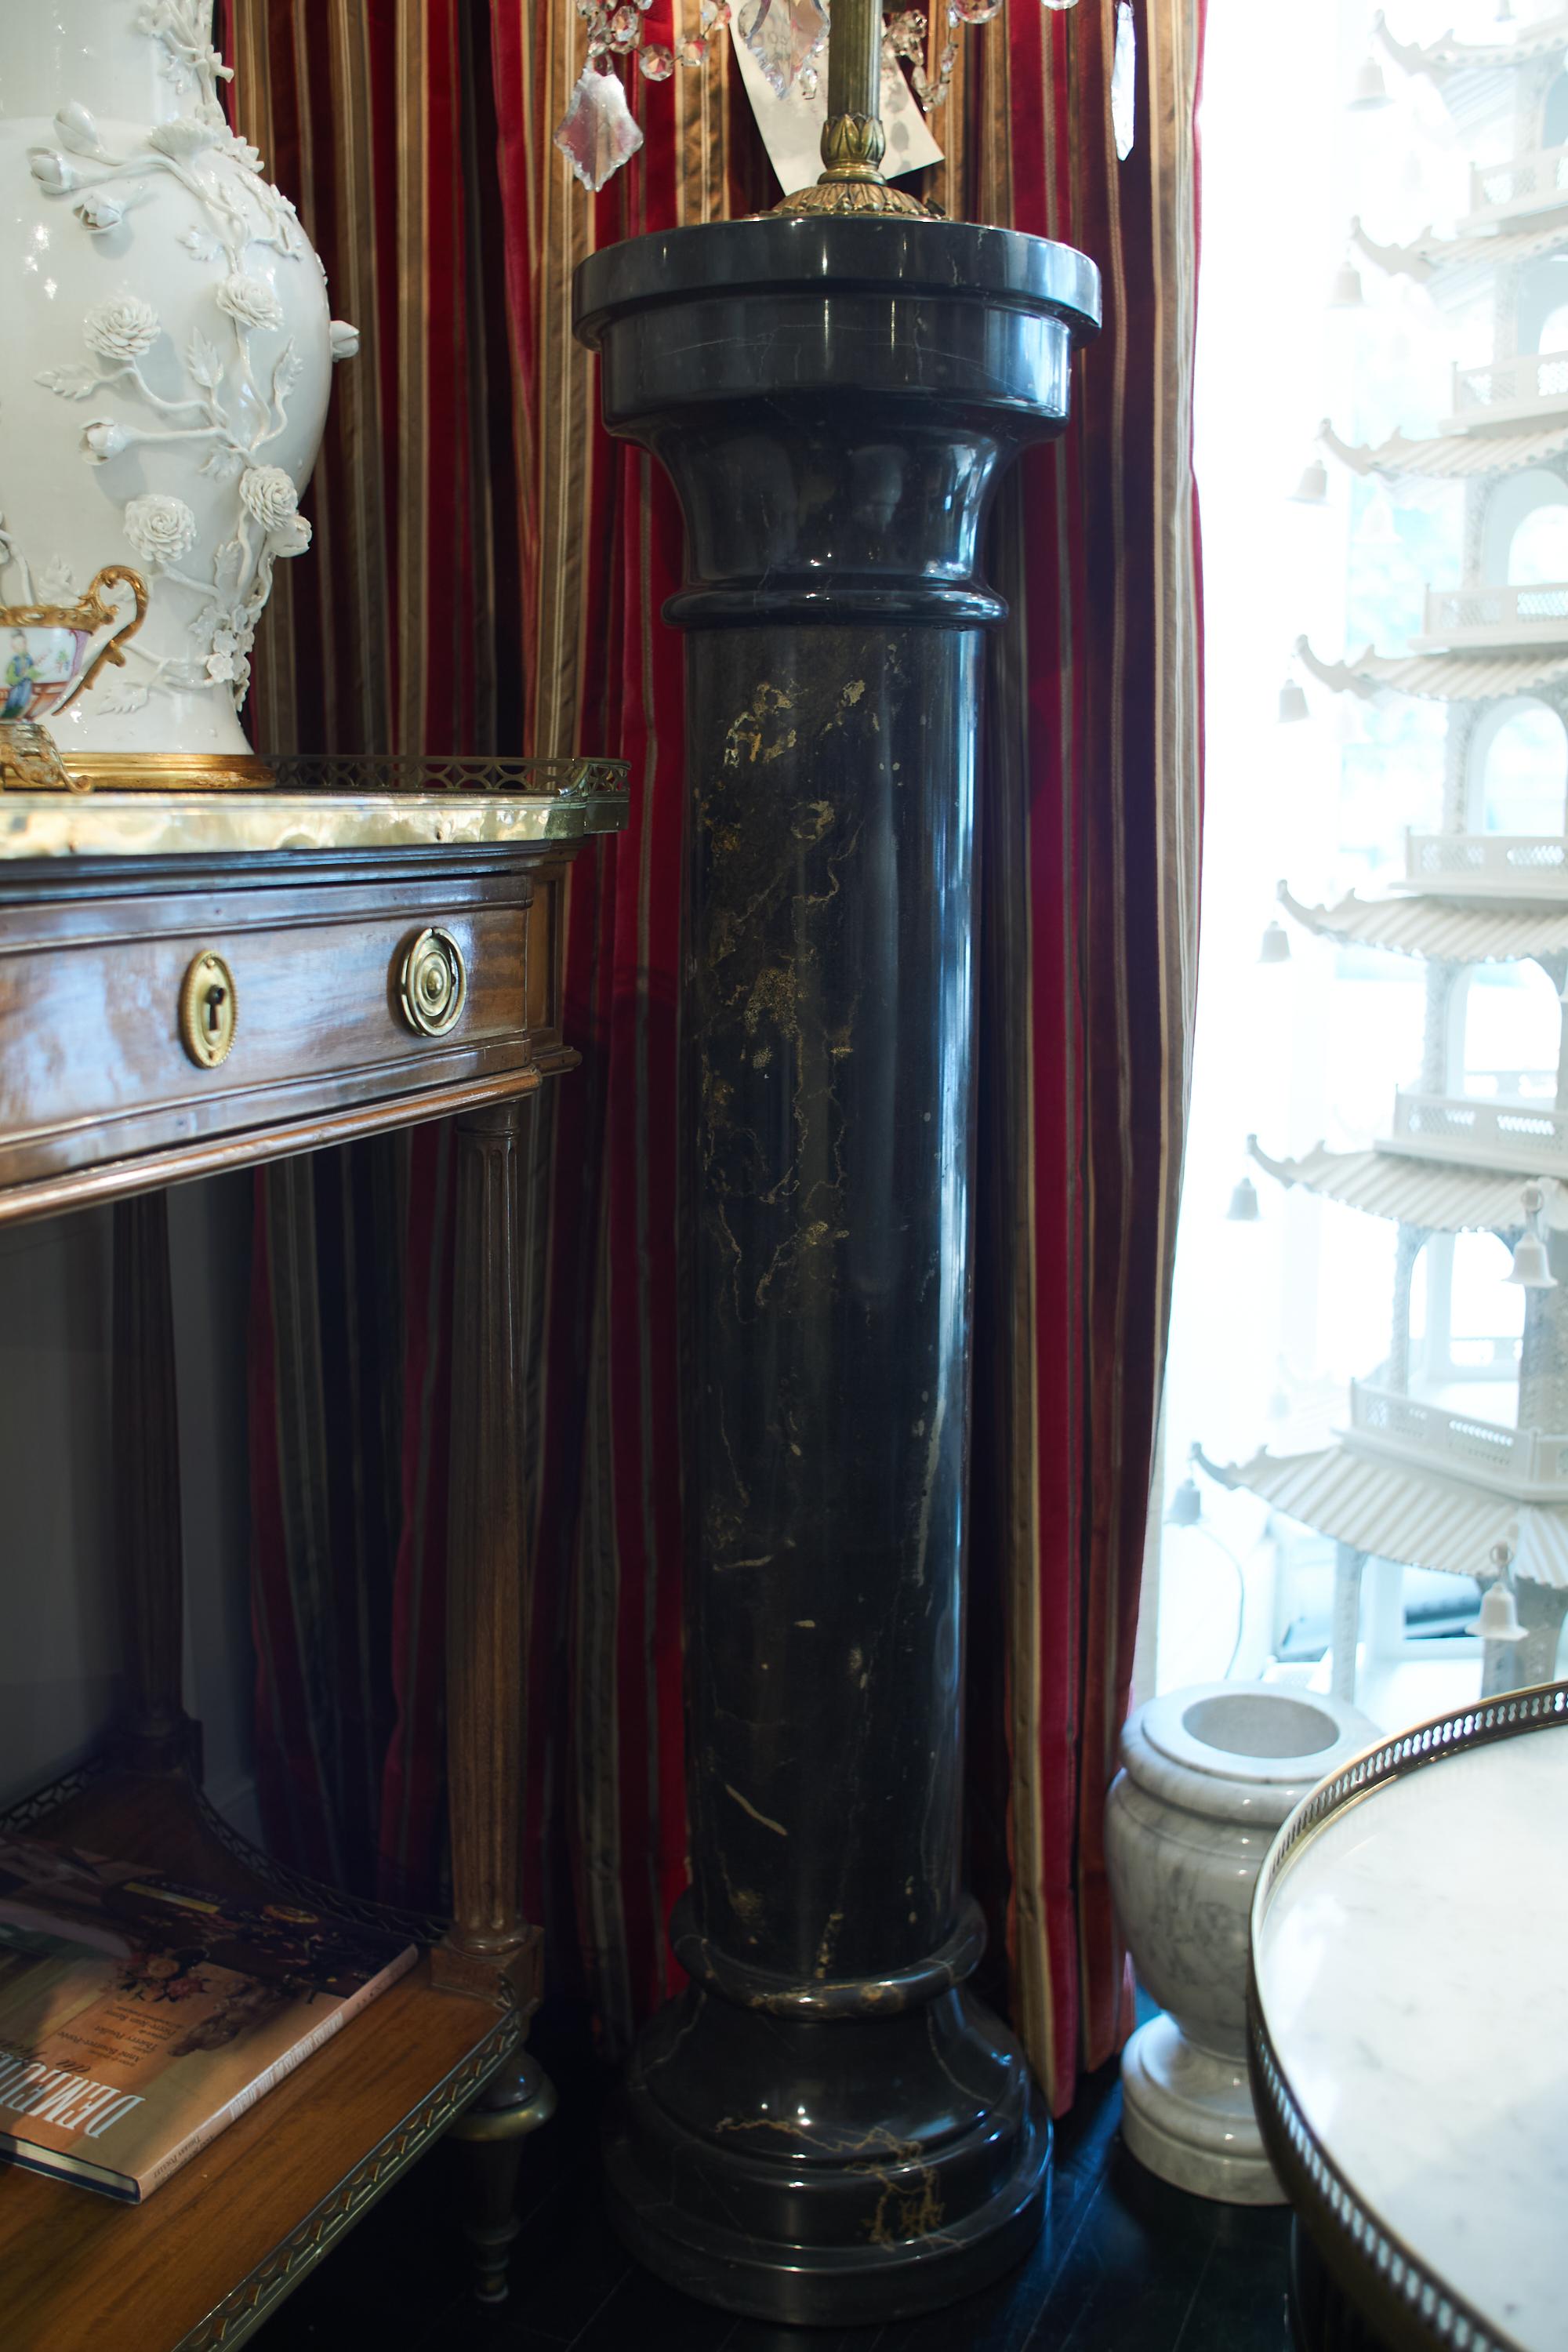 French black marble column.
For a chic interior, classical lines in the spirit of Hollywood Regency.